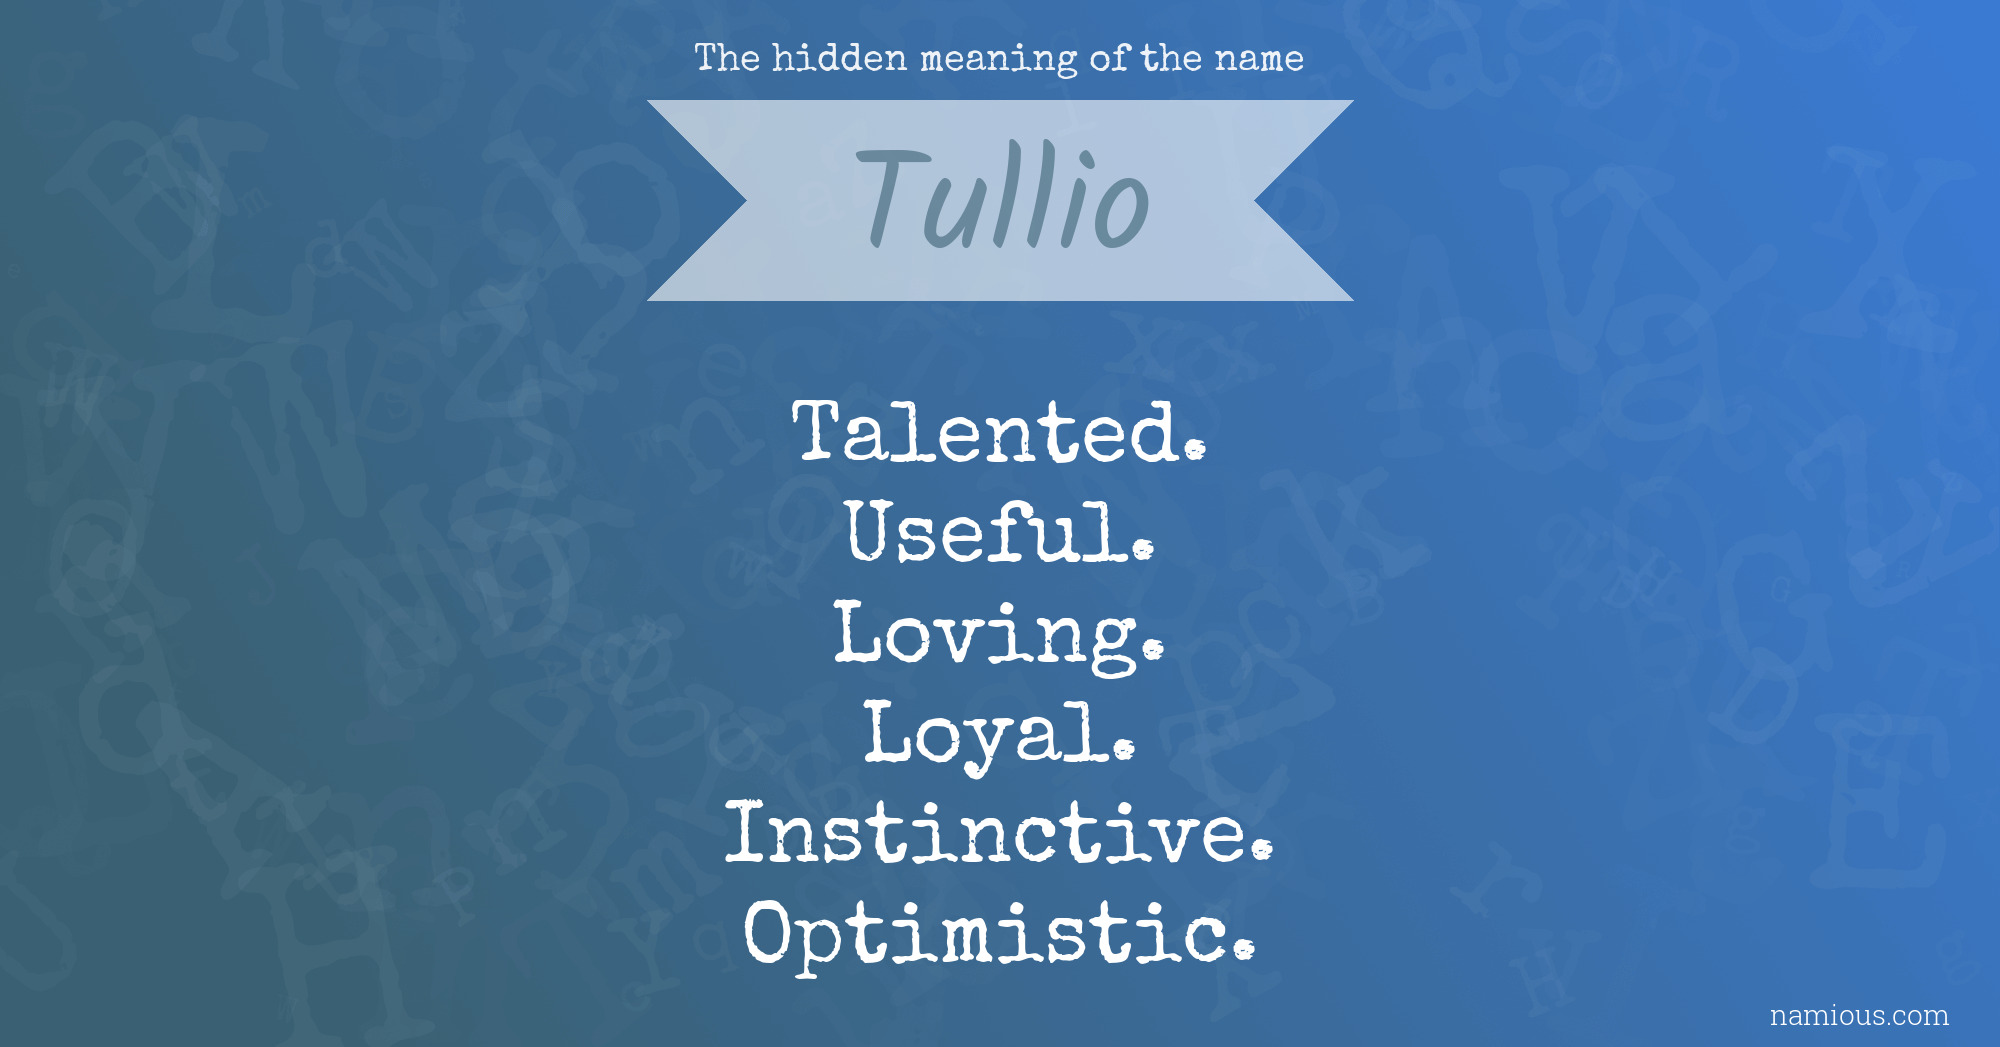 The hidden meaning of the name Tullio